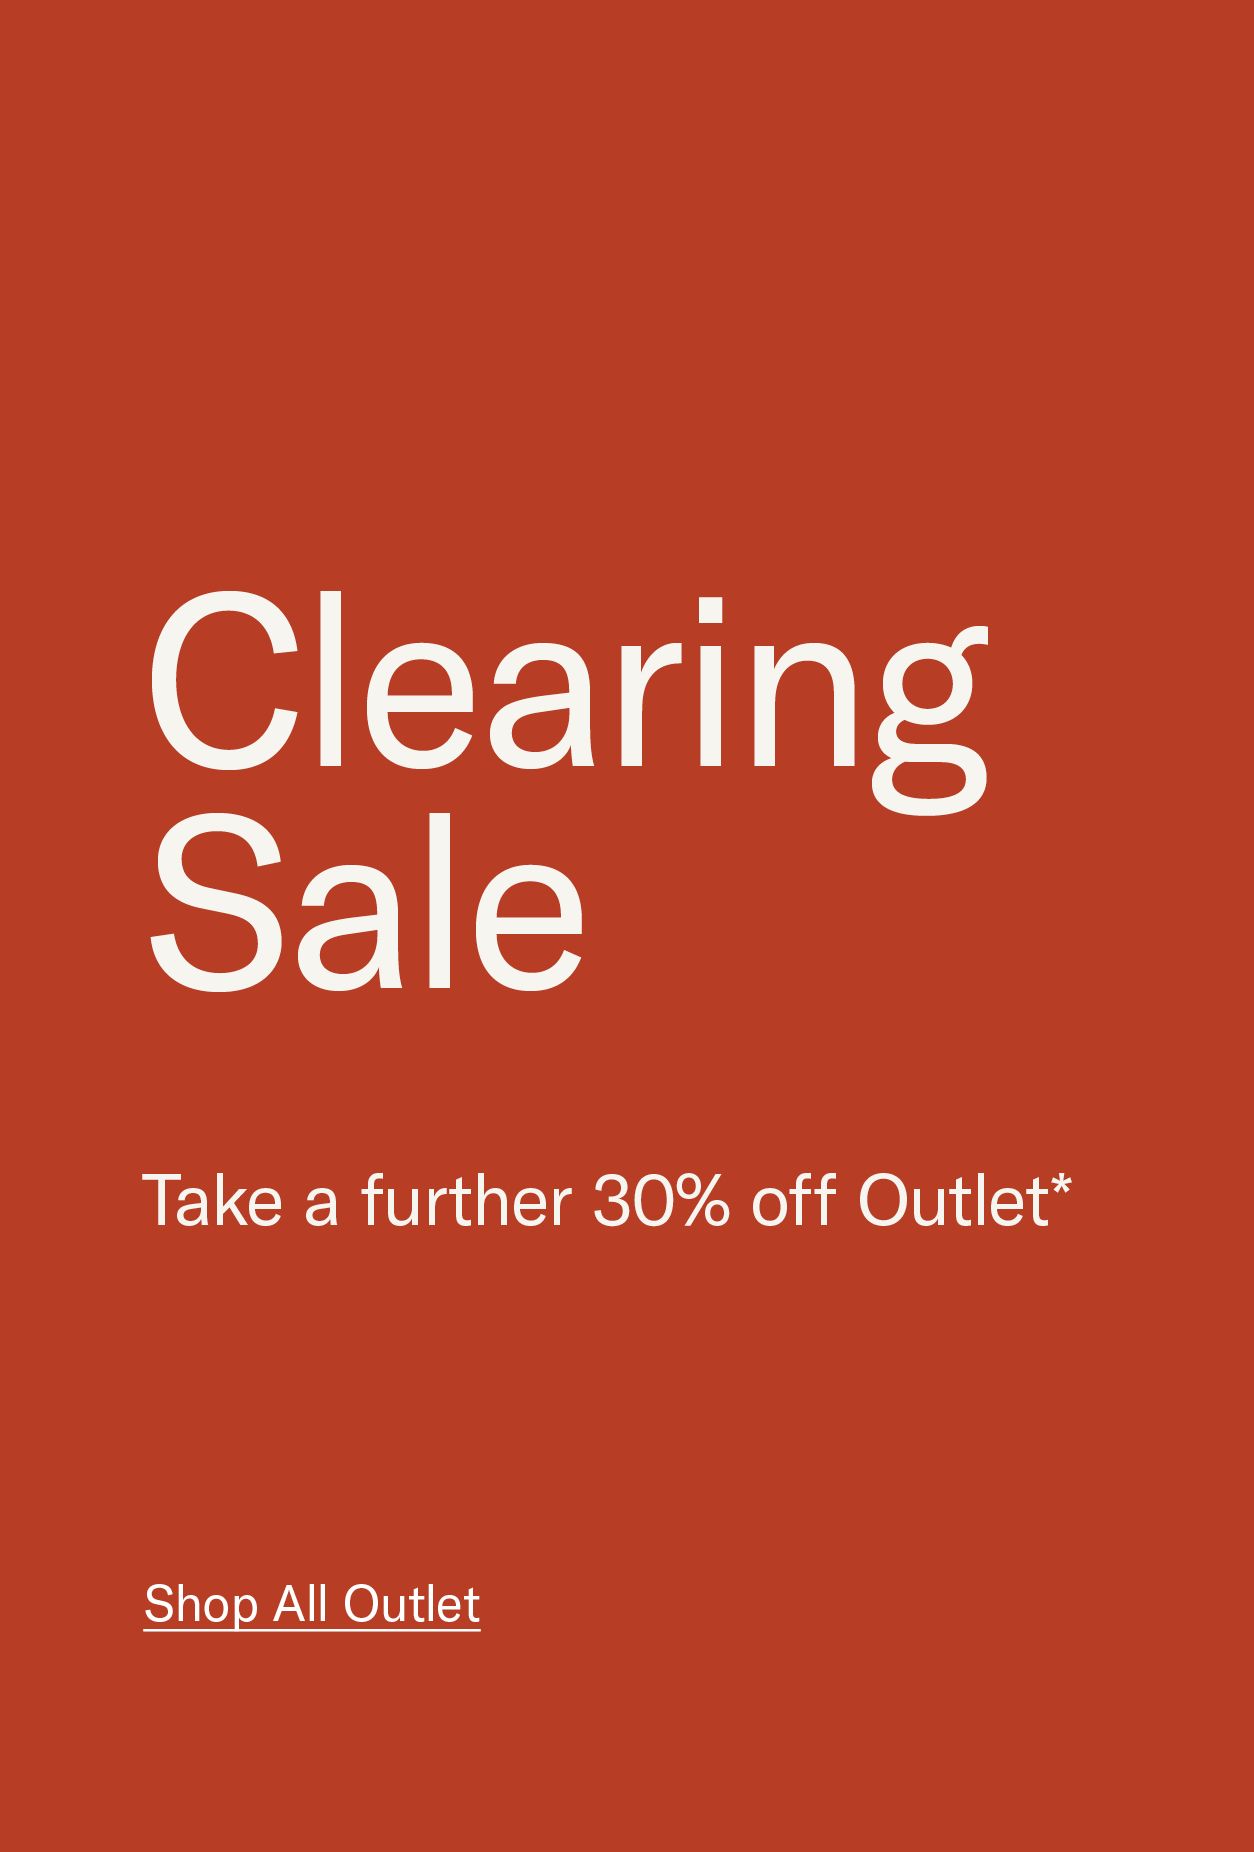 Clearing Sale